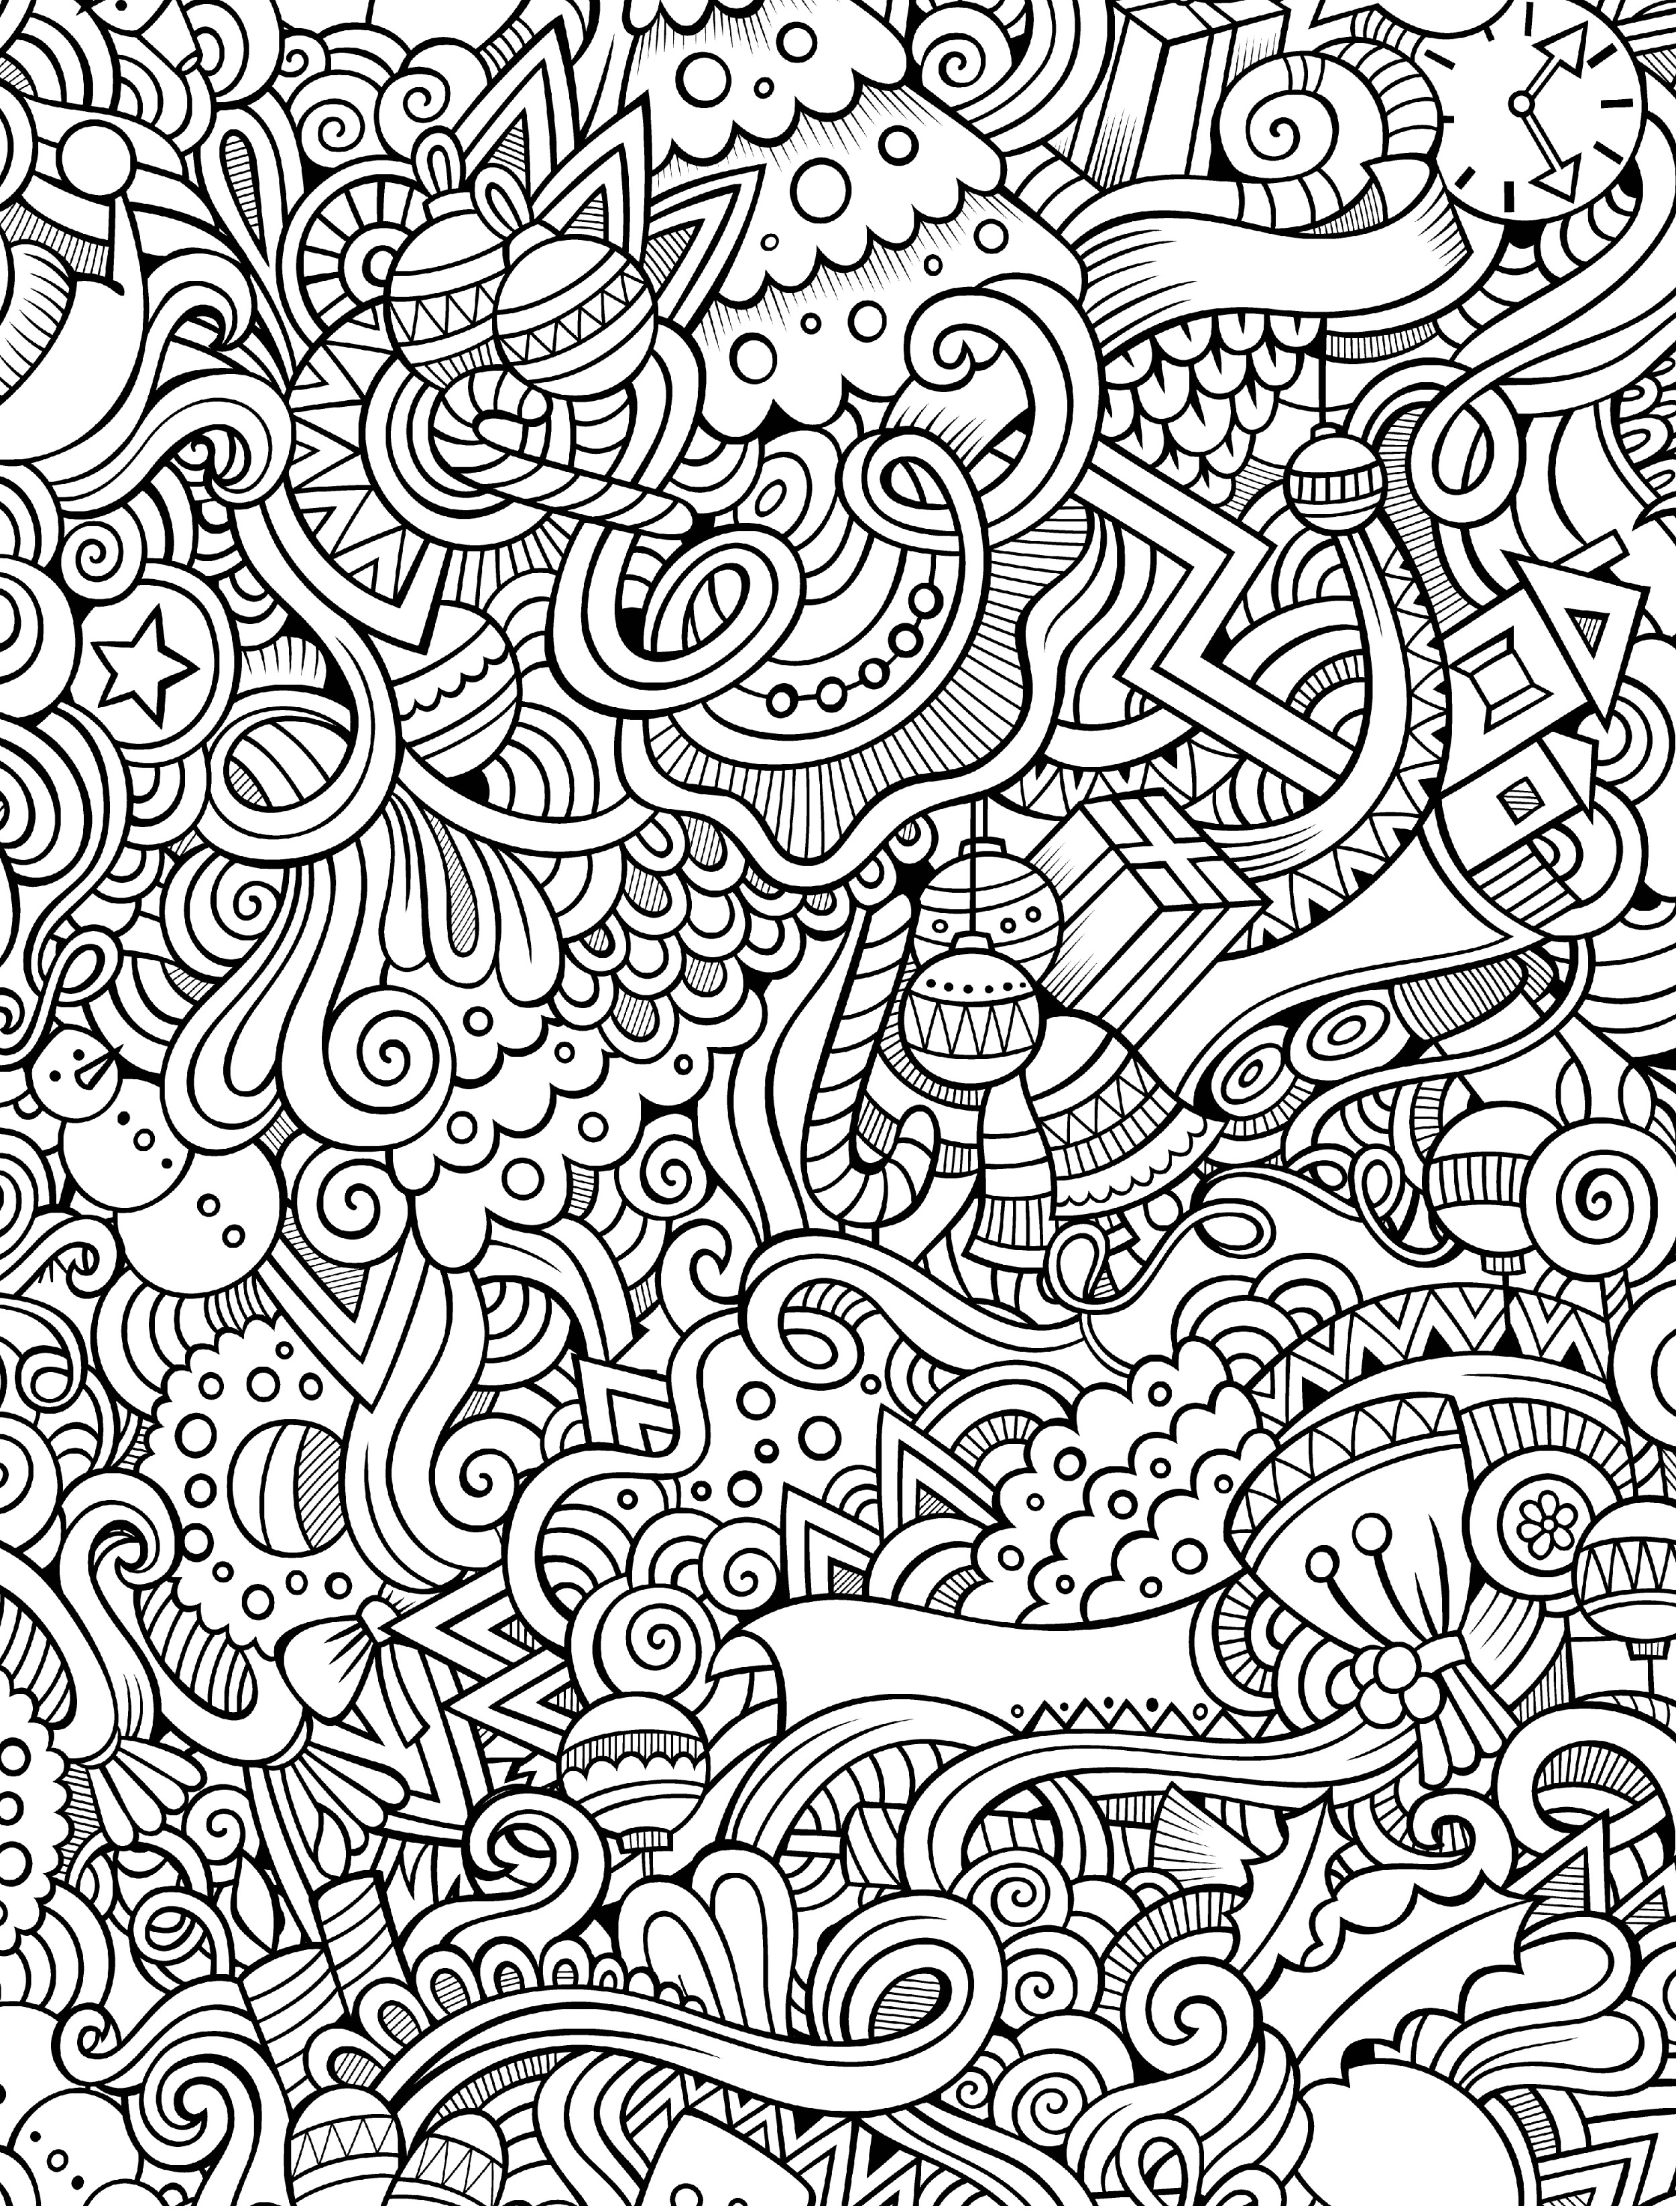 Free Christmas Printable Coloring Pages Free Christmas Coloring Pages To Print For Adults At Getdrawings